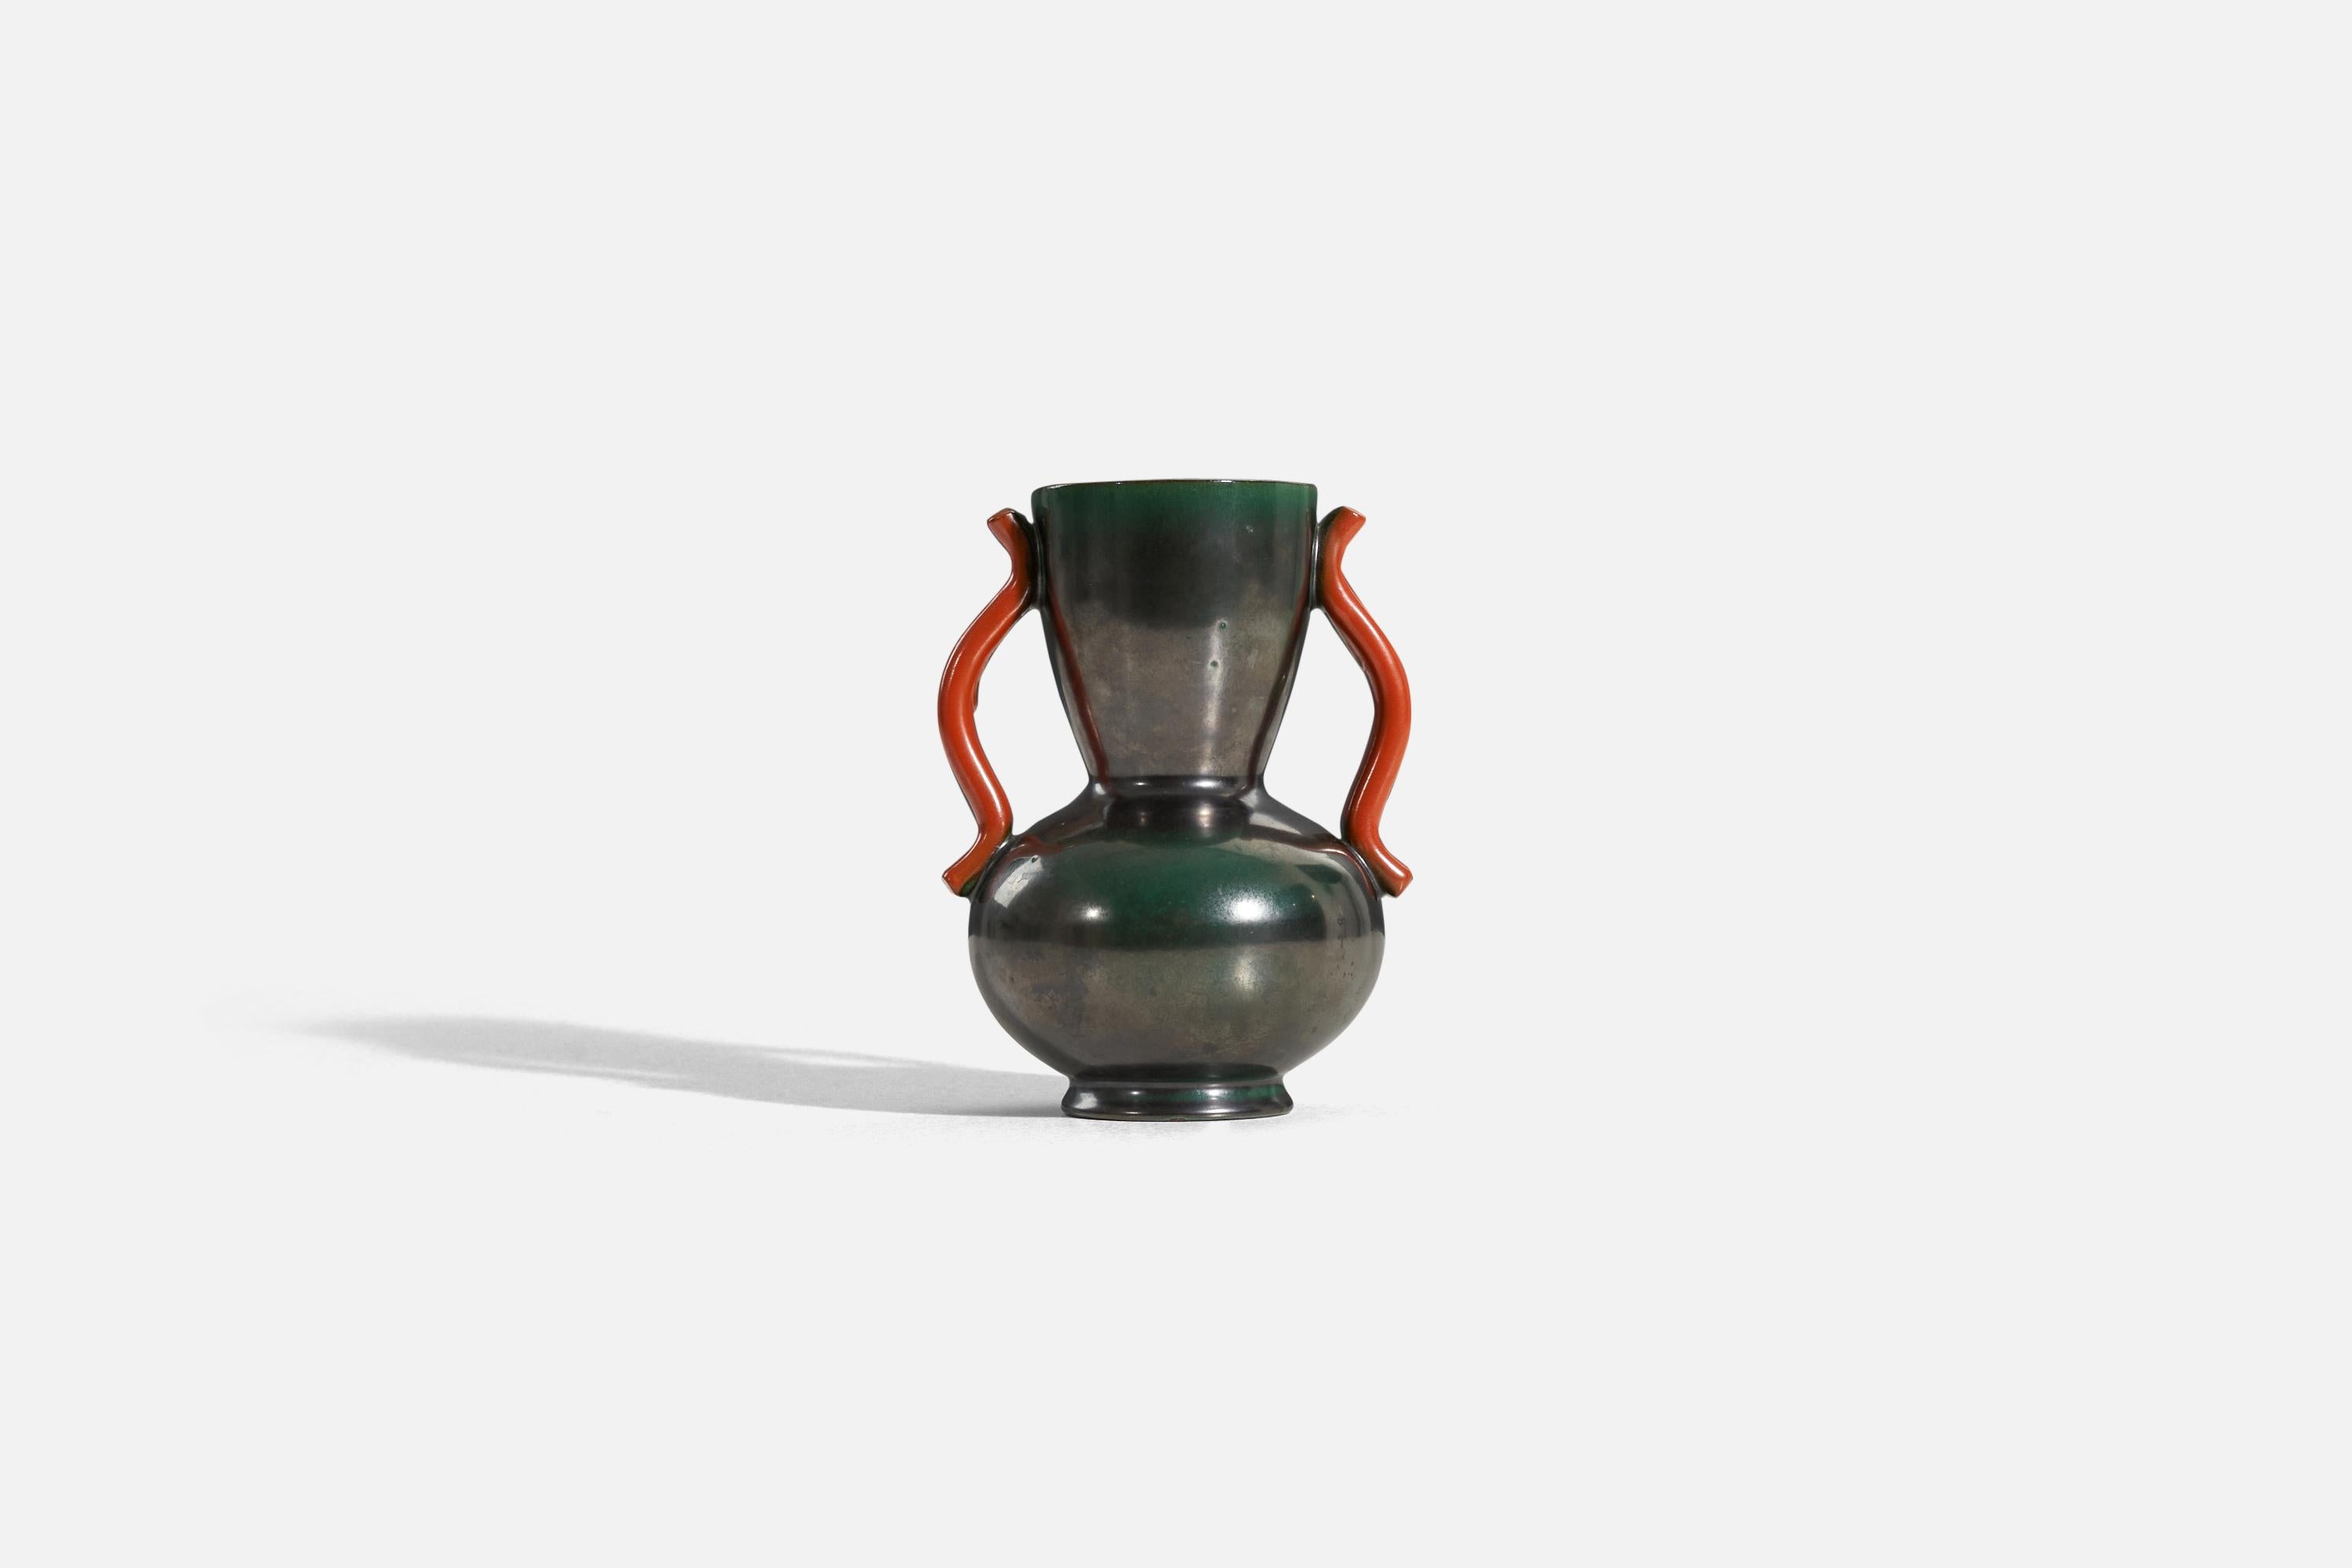 A green, brown and orange, glazed earthenware vase designed by Anna-Lisa Thomson and produced by Upsala-Ekeby, Sweden, 1940s. 

